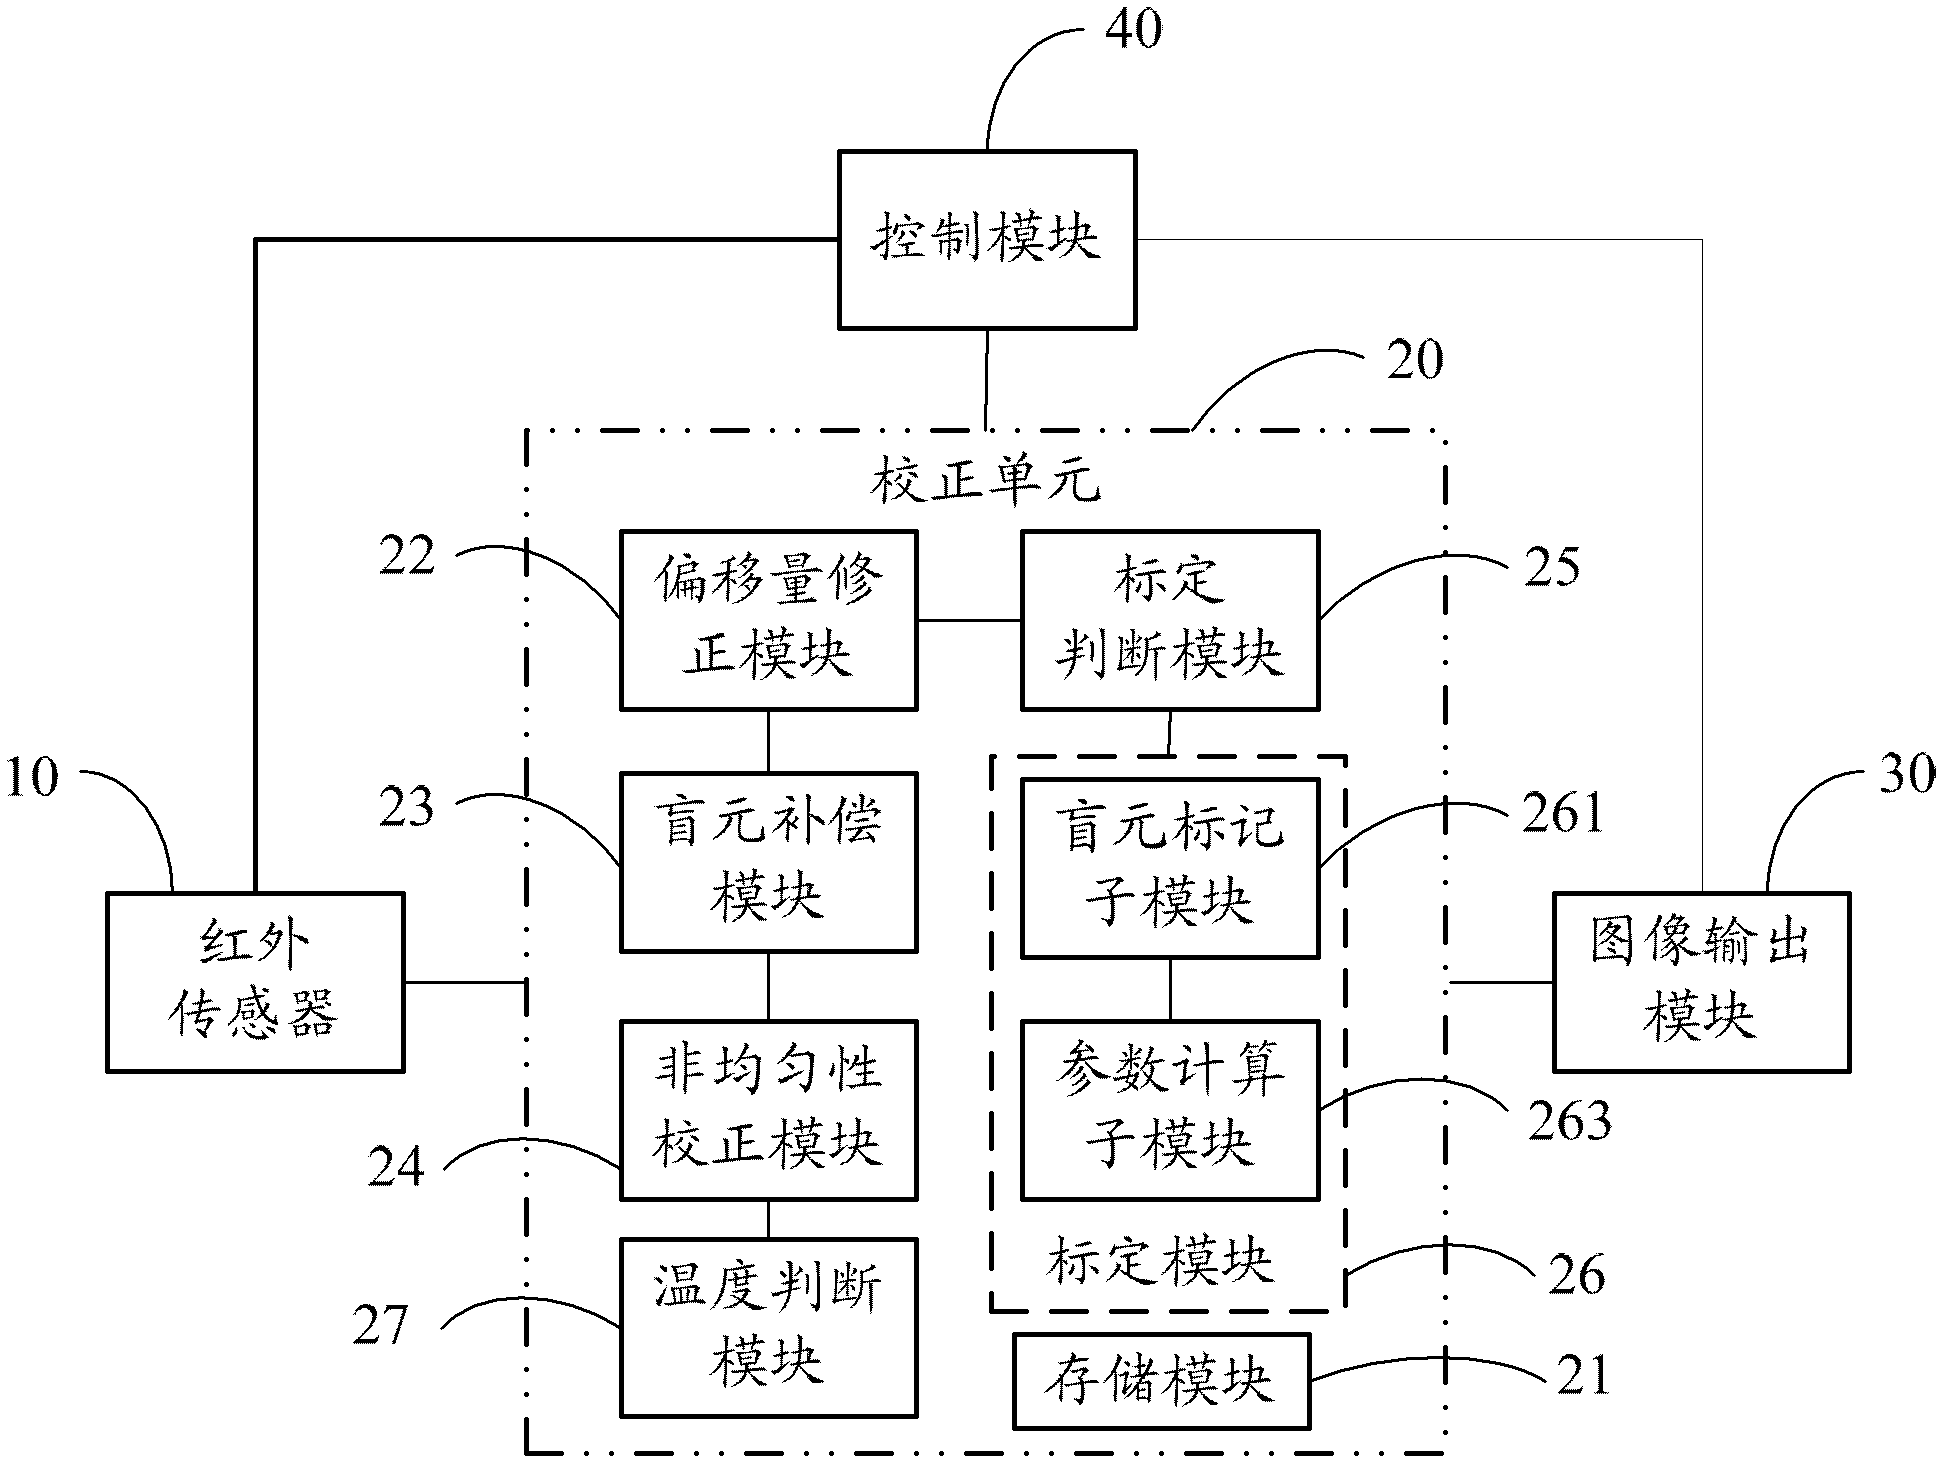 Infrared image processing method and infrared image processing device